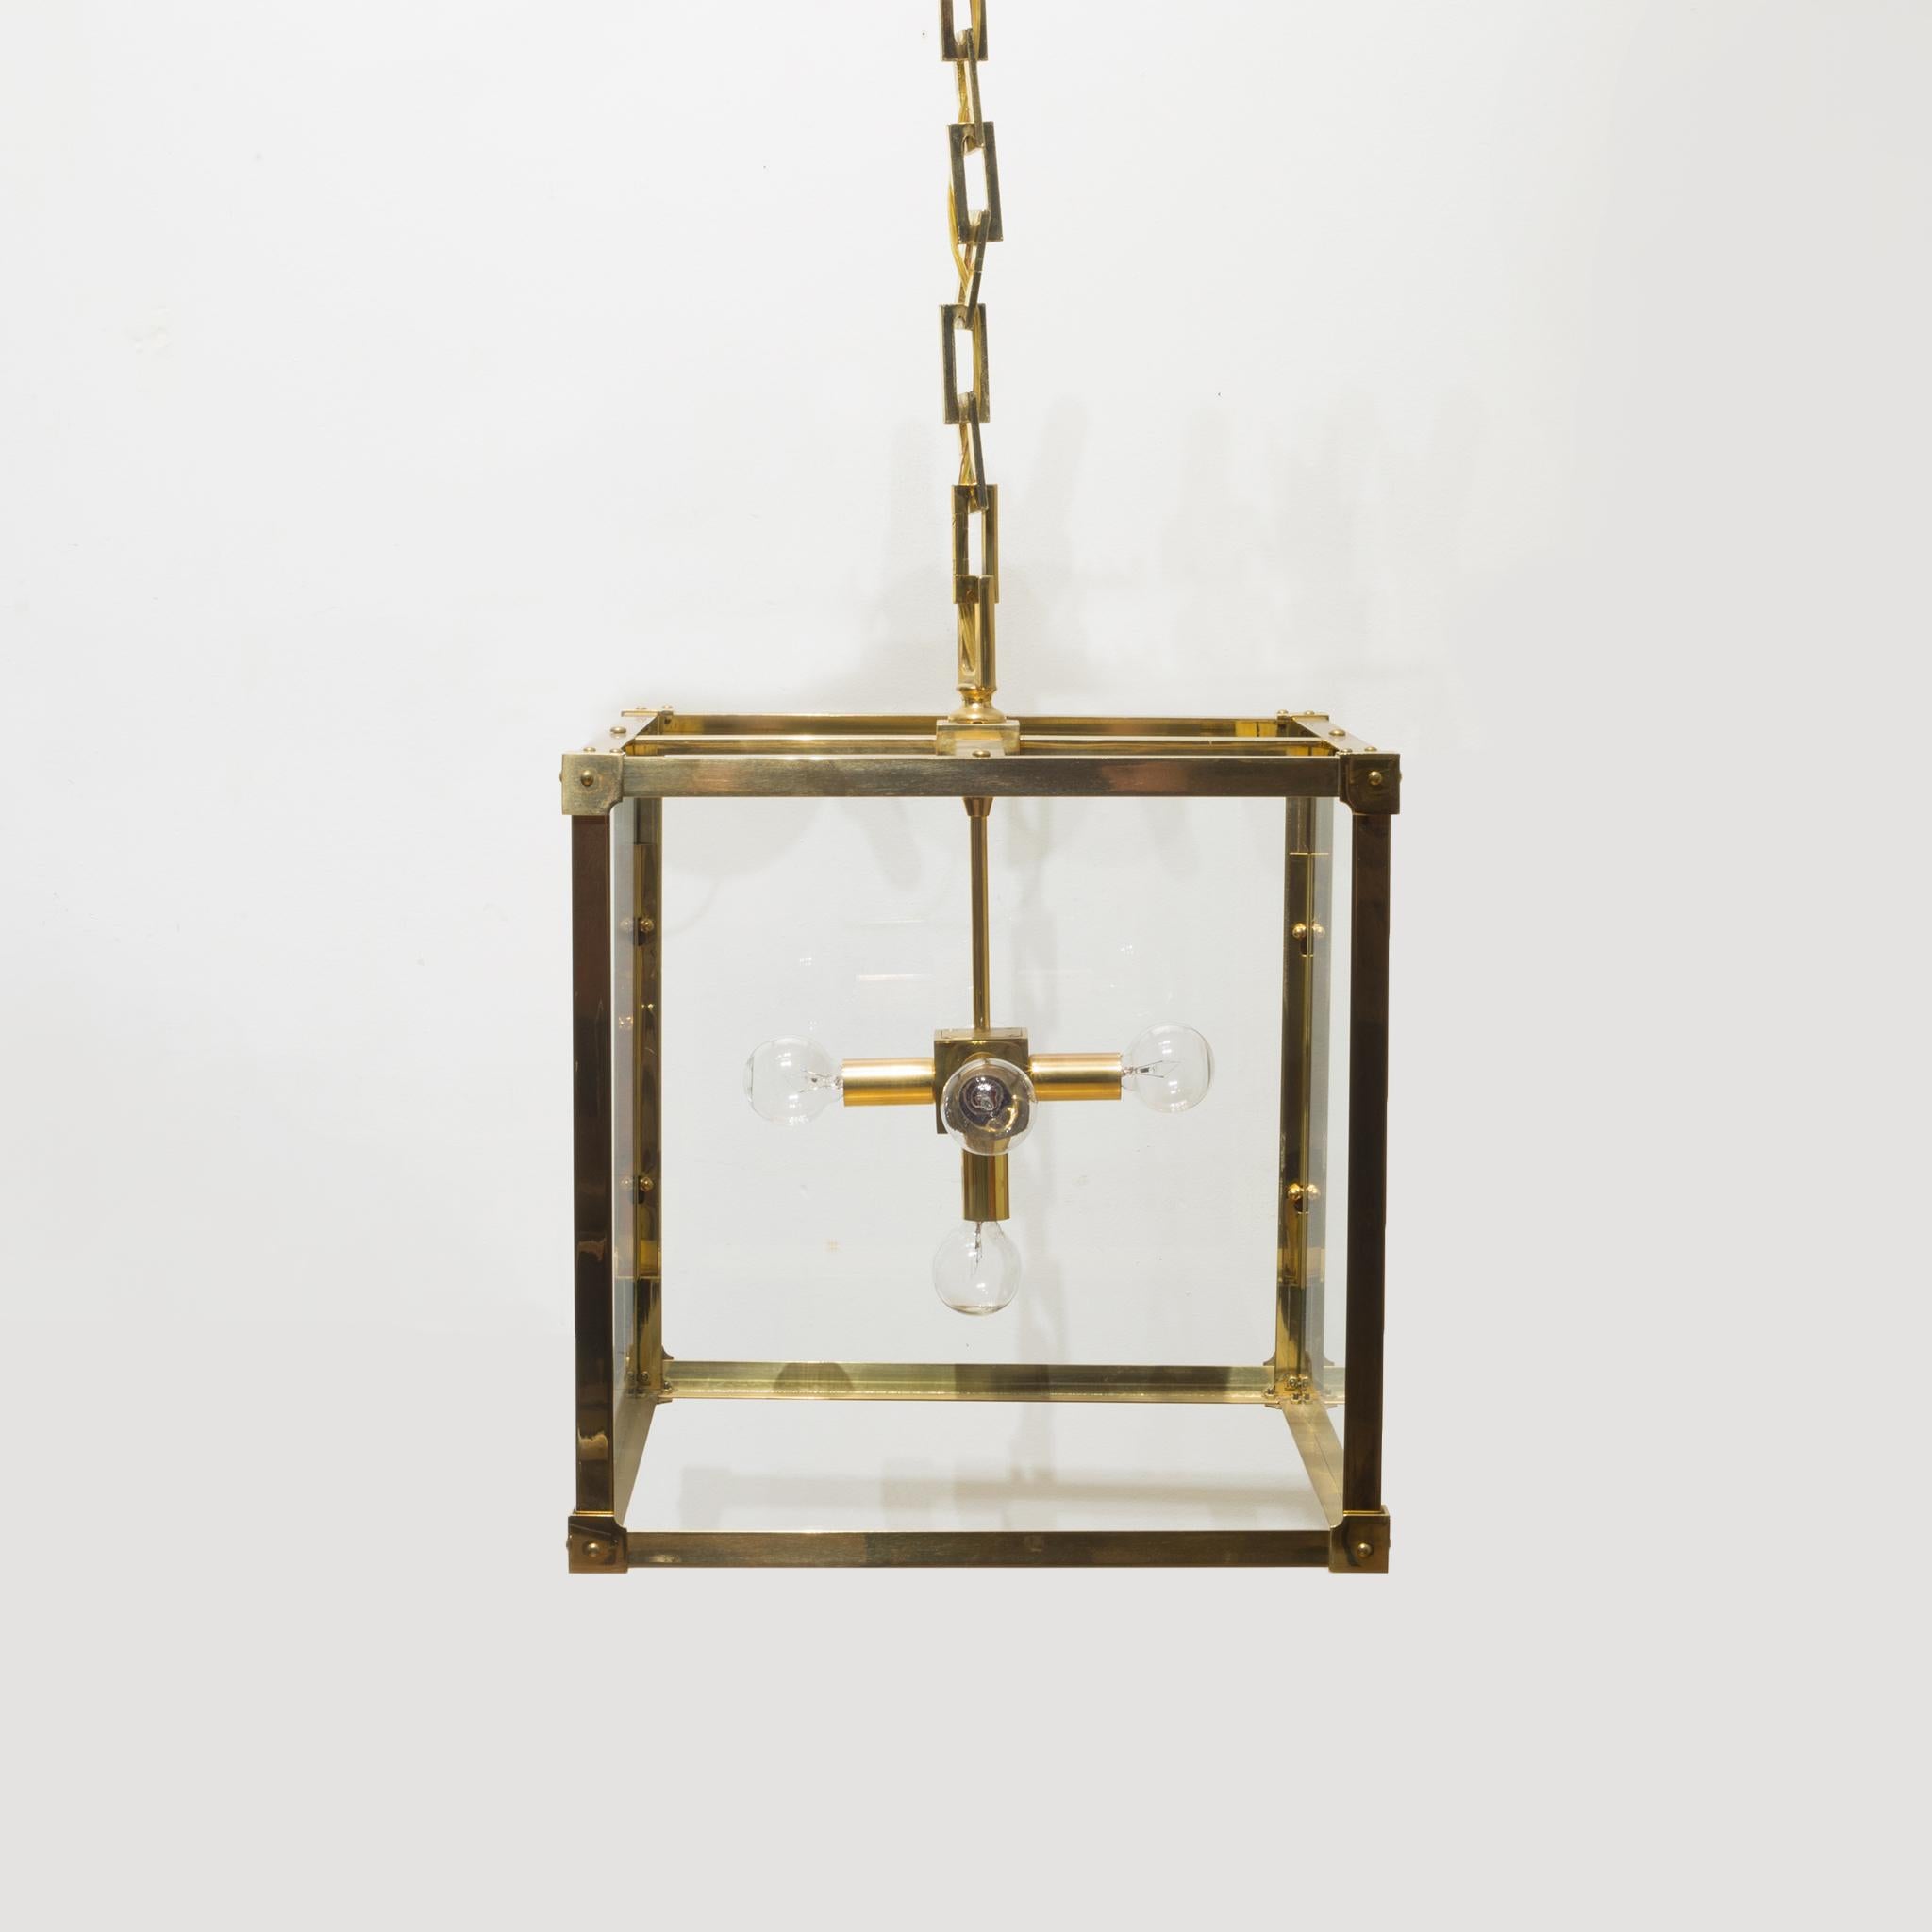 About

Price is per light.
A delicate yet commanding, four-square lantern featuring smooth surfaces and sharp, 90 degree corners. The slender legs are joined by jewelry-cast corners with clean, domes fasteners. Glaze with clear glass panels.
Shown